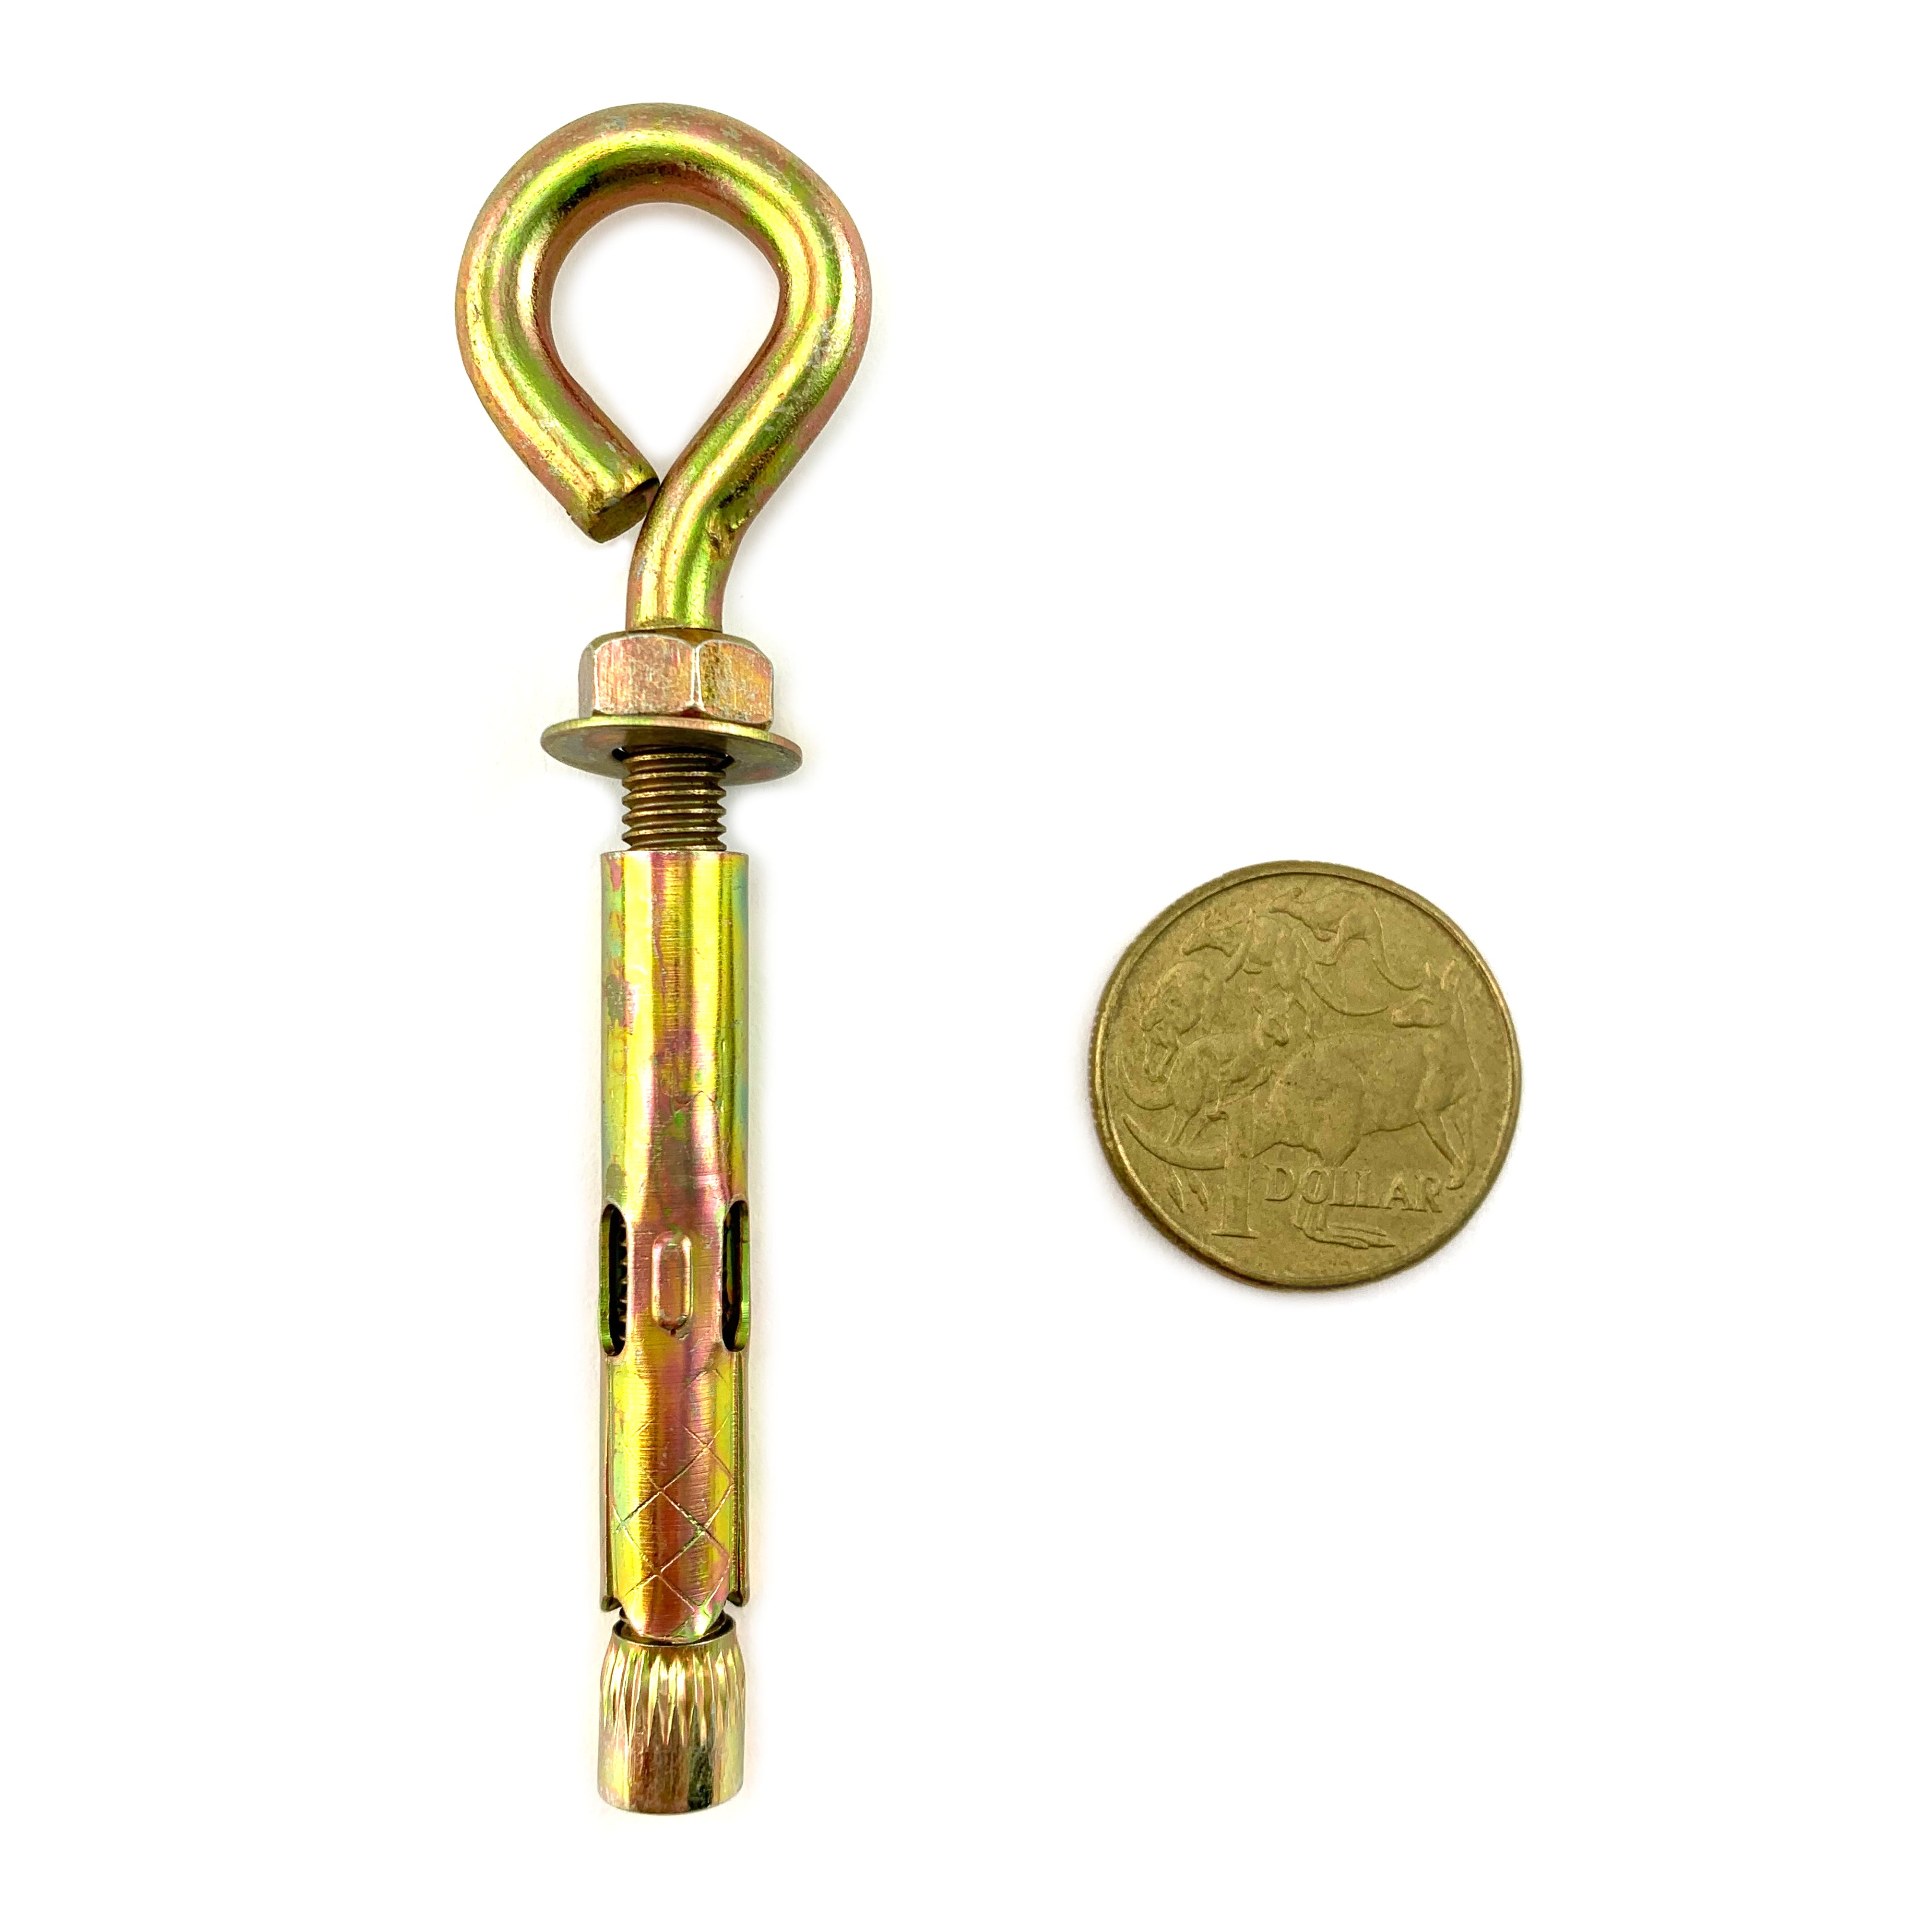 Eye anchor bolt in zinc passivated gold finish, size 6mm. Shop hardware online chain.com.au. Australia wide shipping.